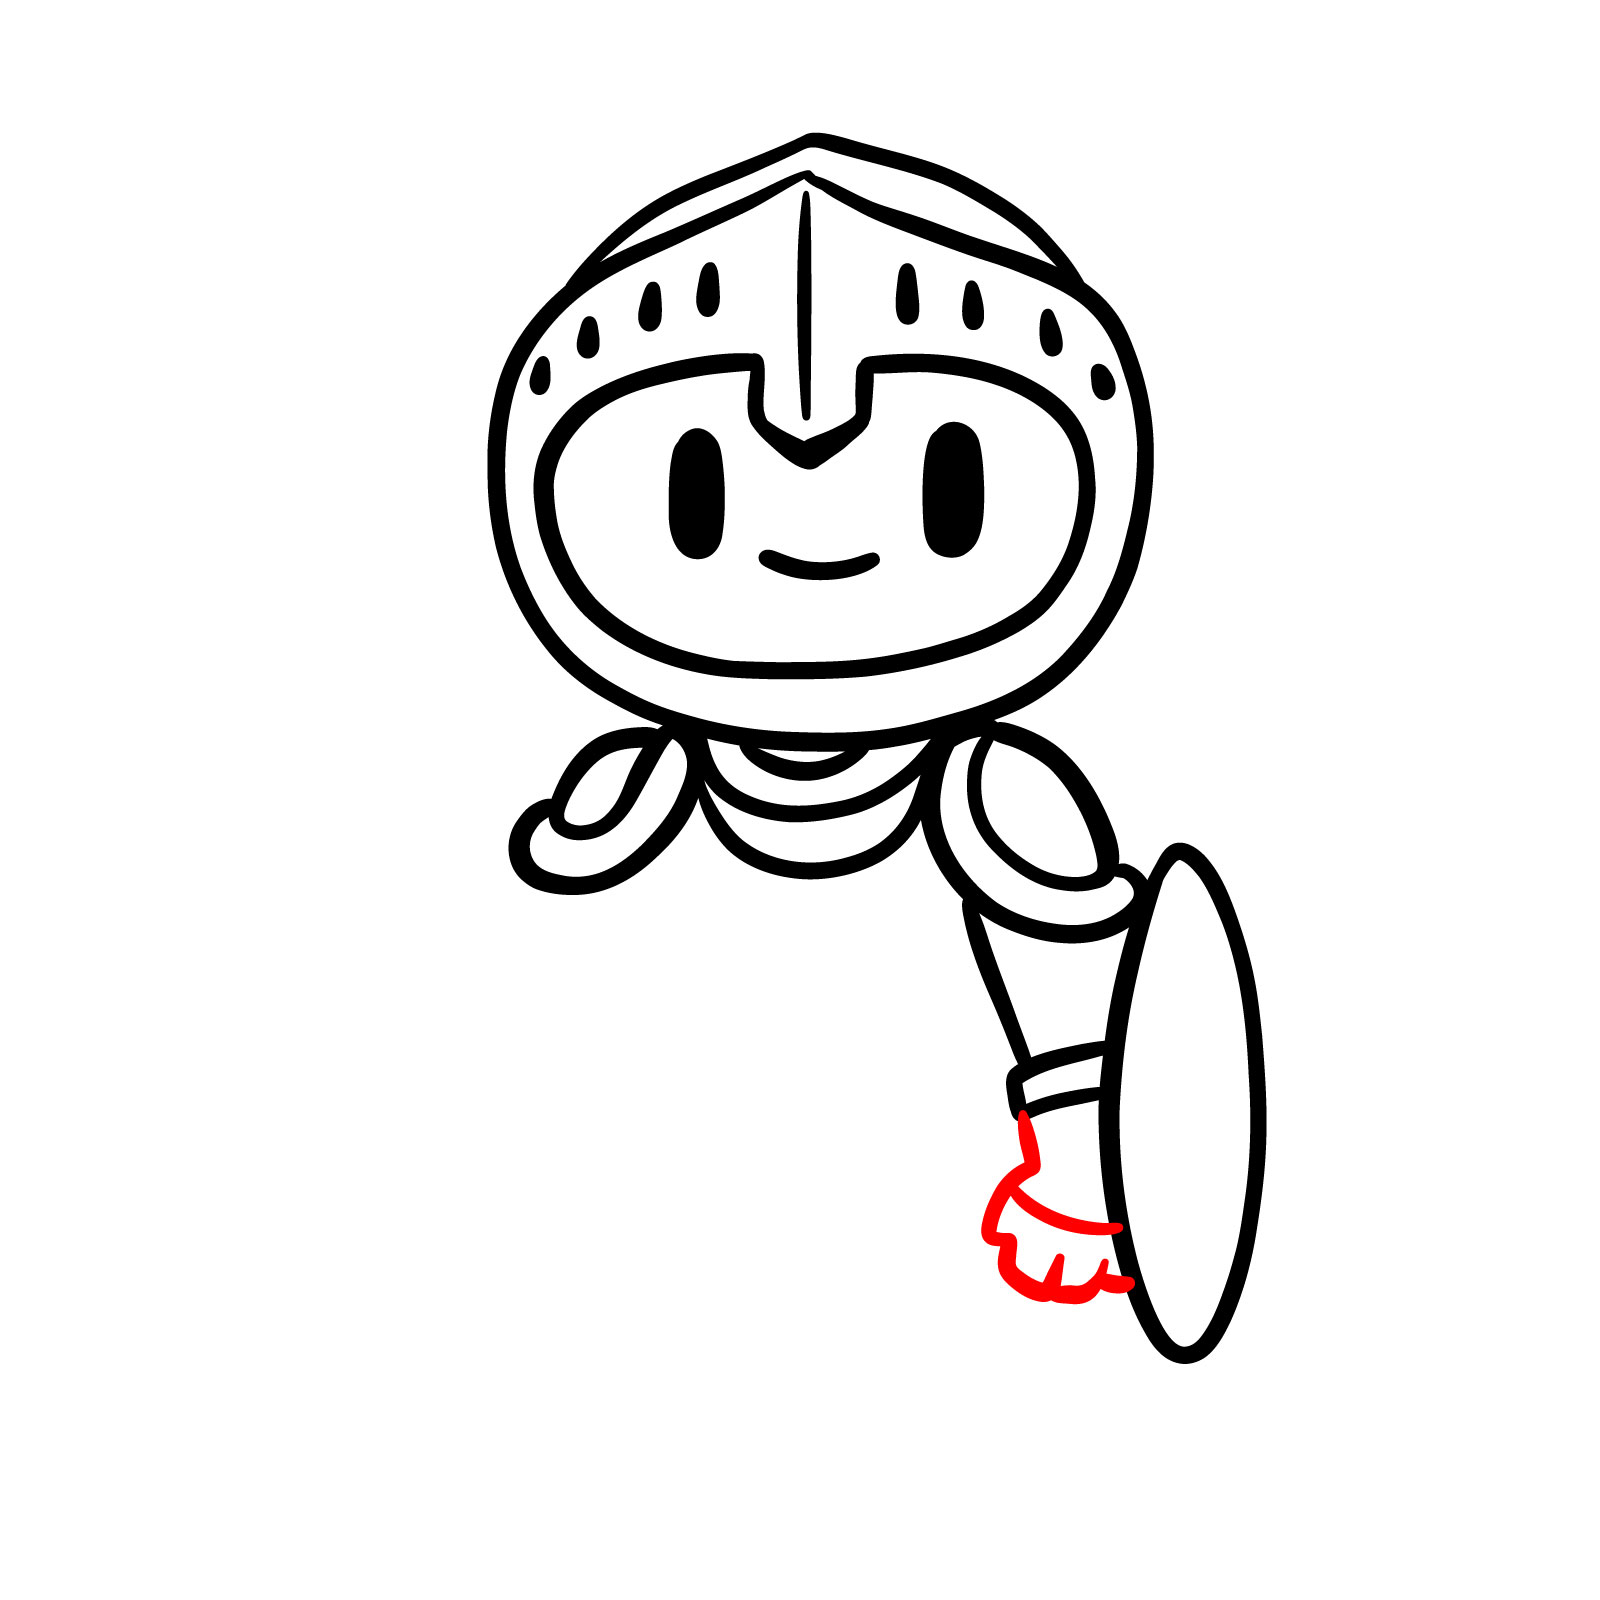 Easy paladin drawing step 6: complete the arm